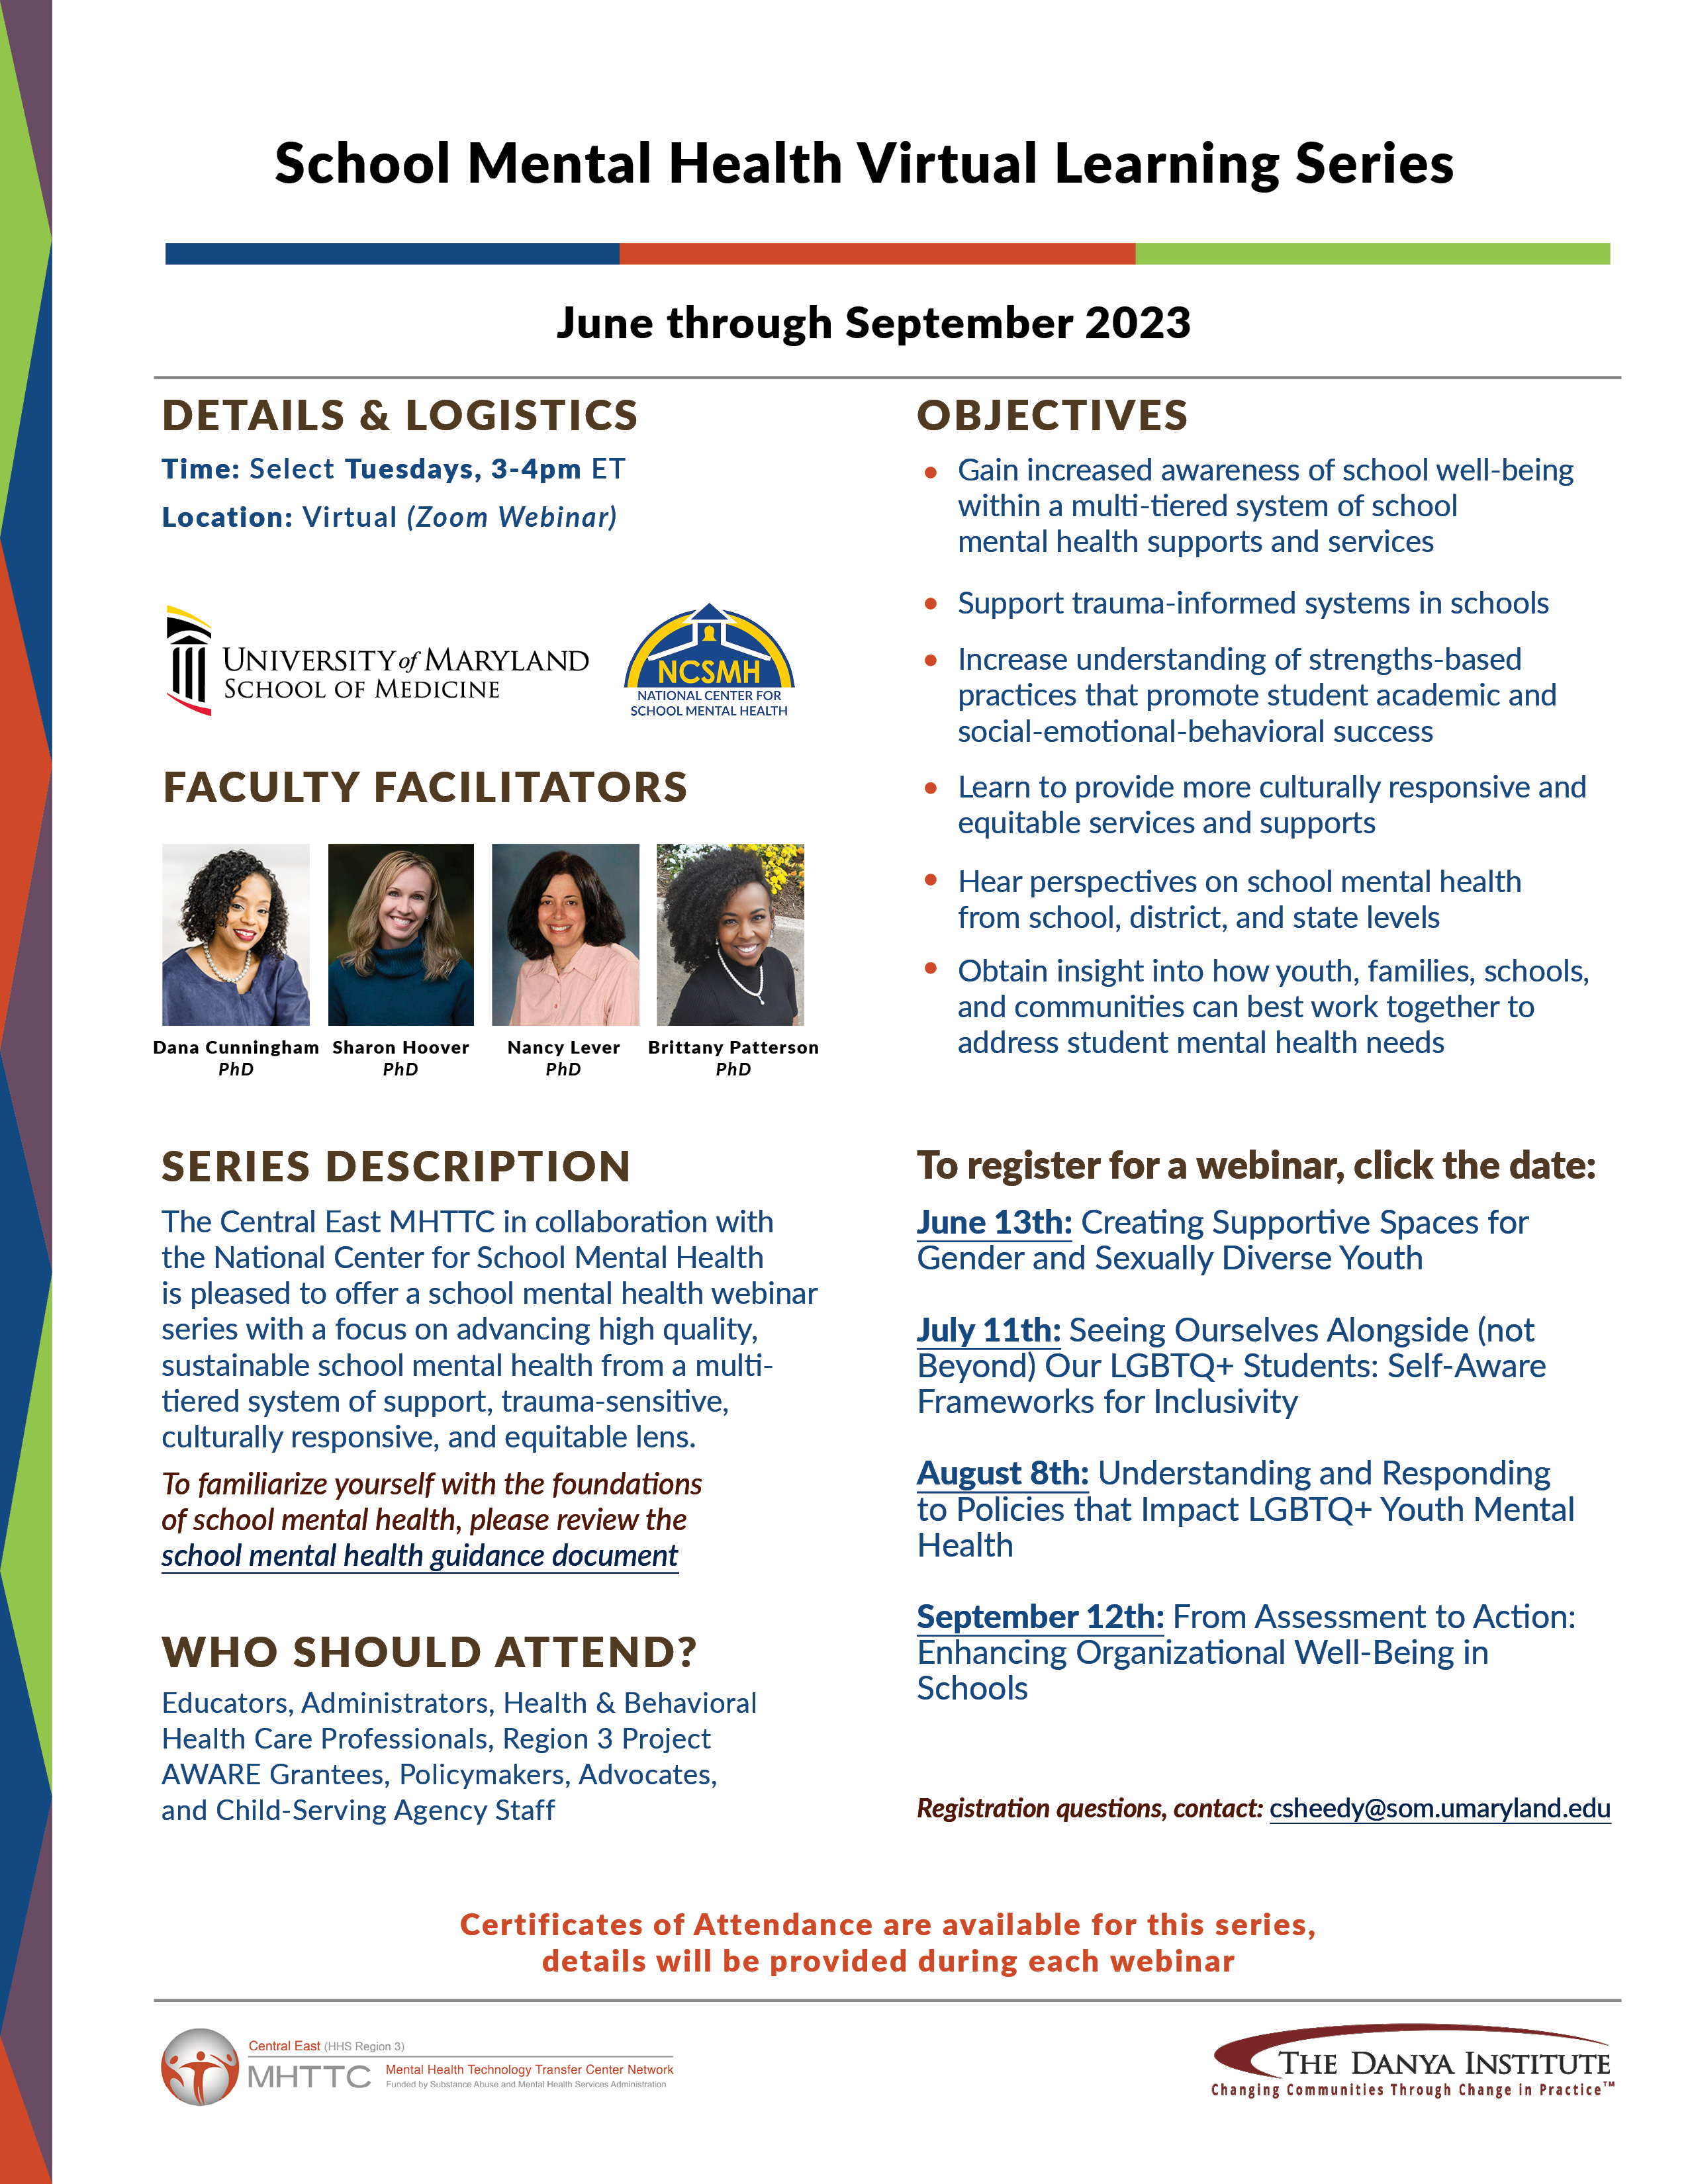 Flyer including information about the School Mental Health Virtual Learning Series.